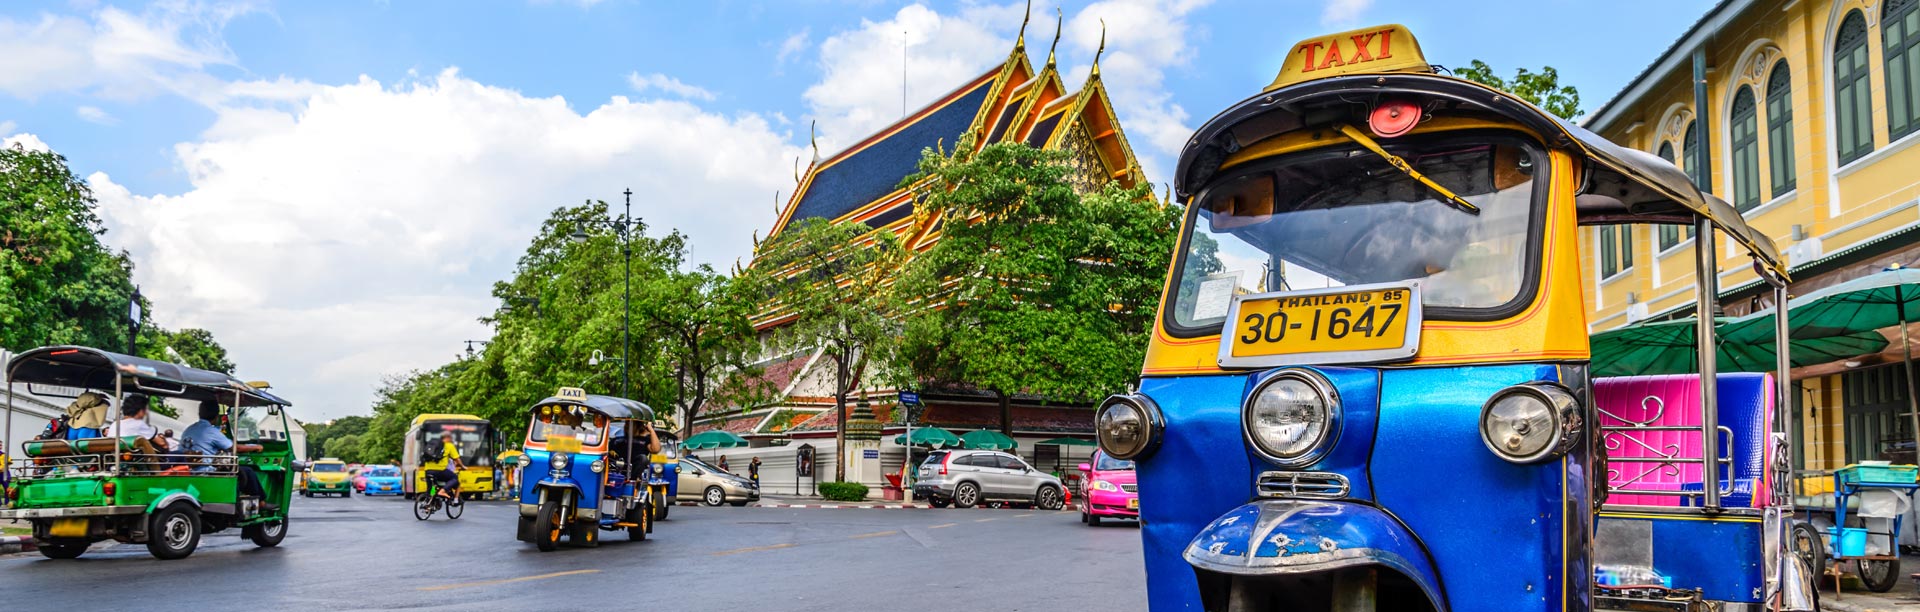 How to Negotiate for a Better Tuk-tuk Price in Thailand